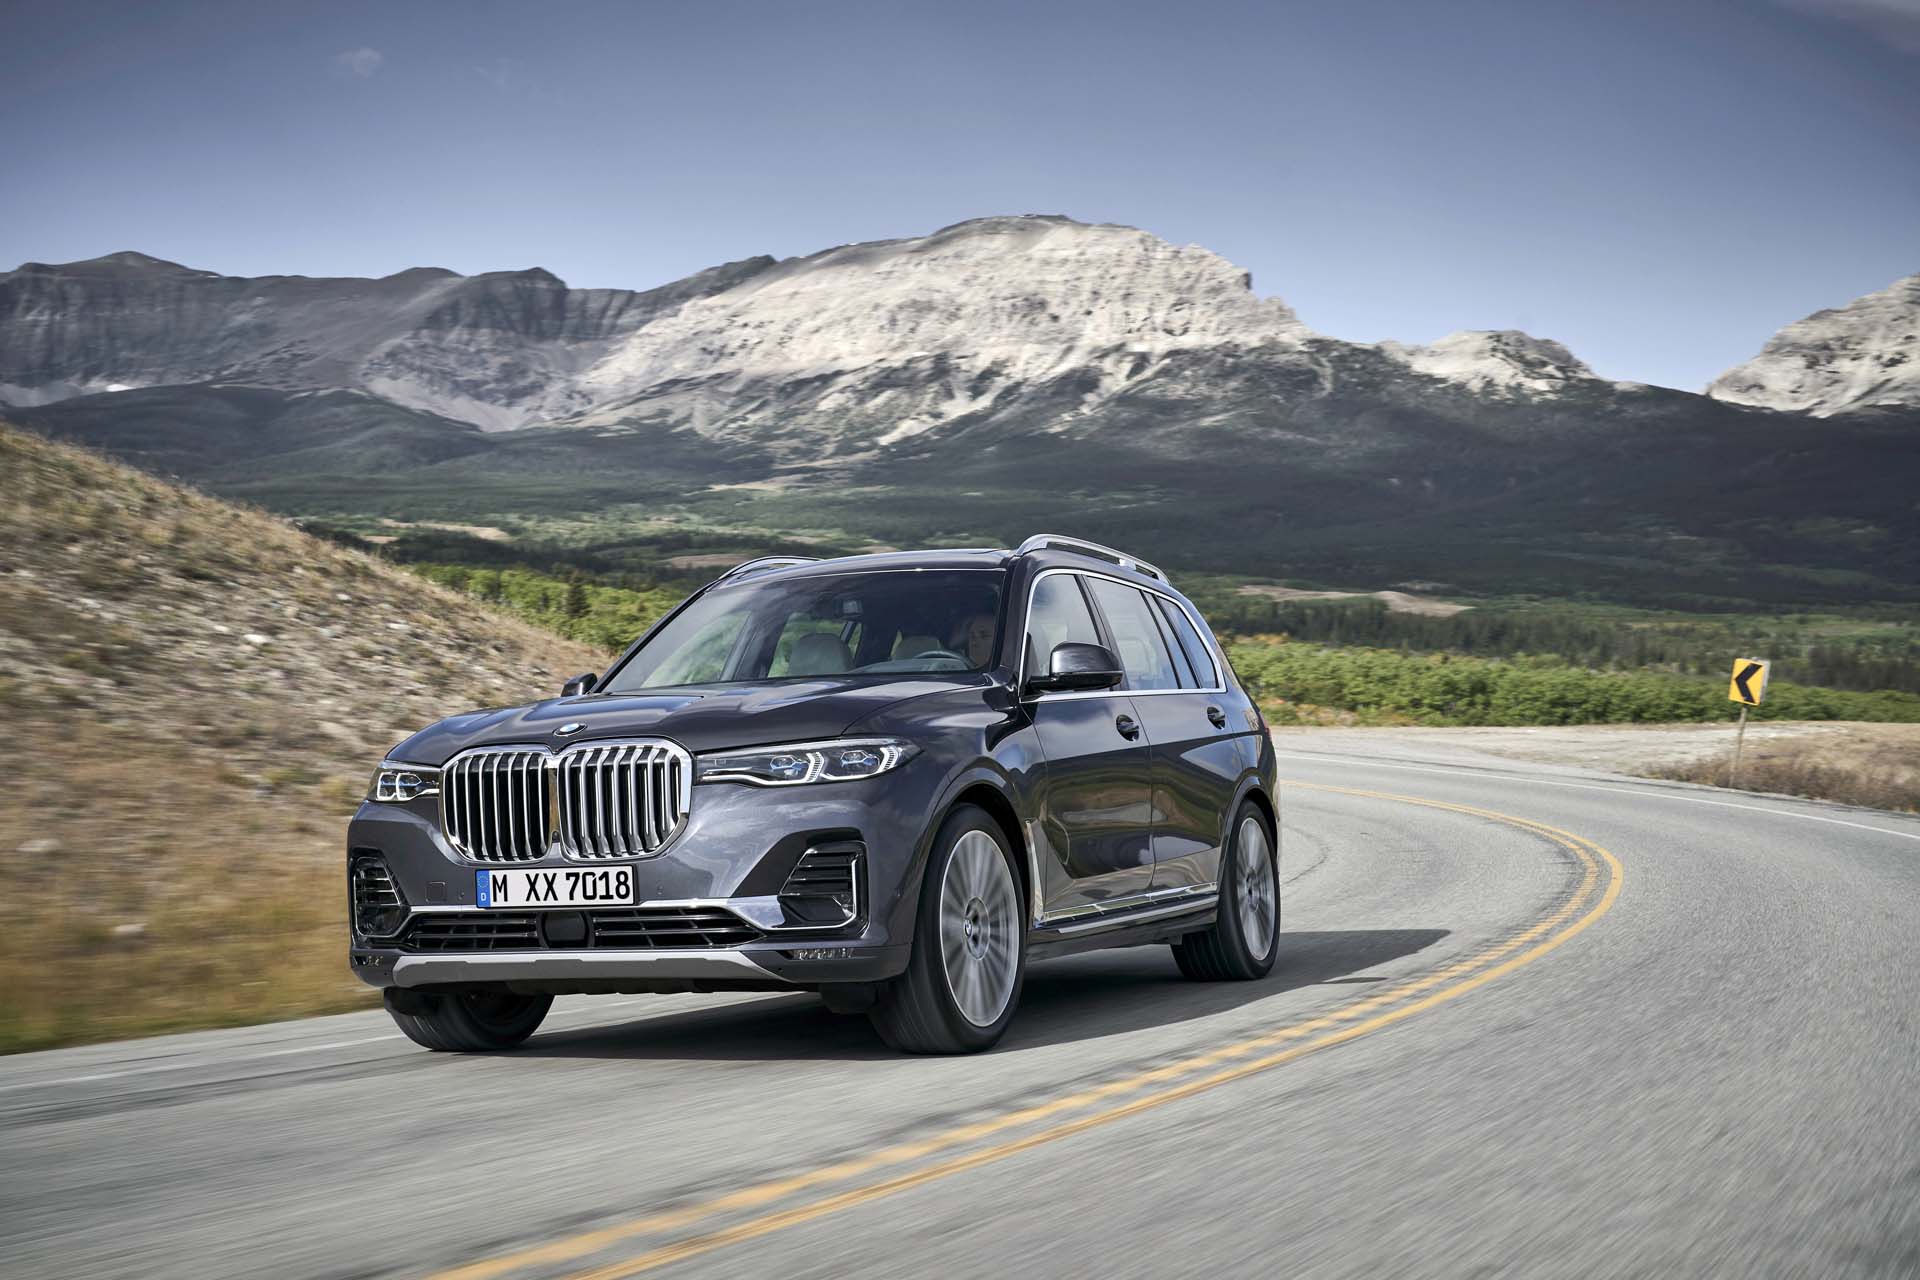 2019 Bmw X7 3 Row Suv Debuts The Bling Comes Standard